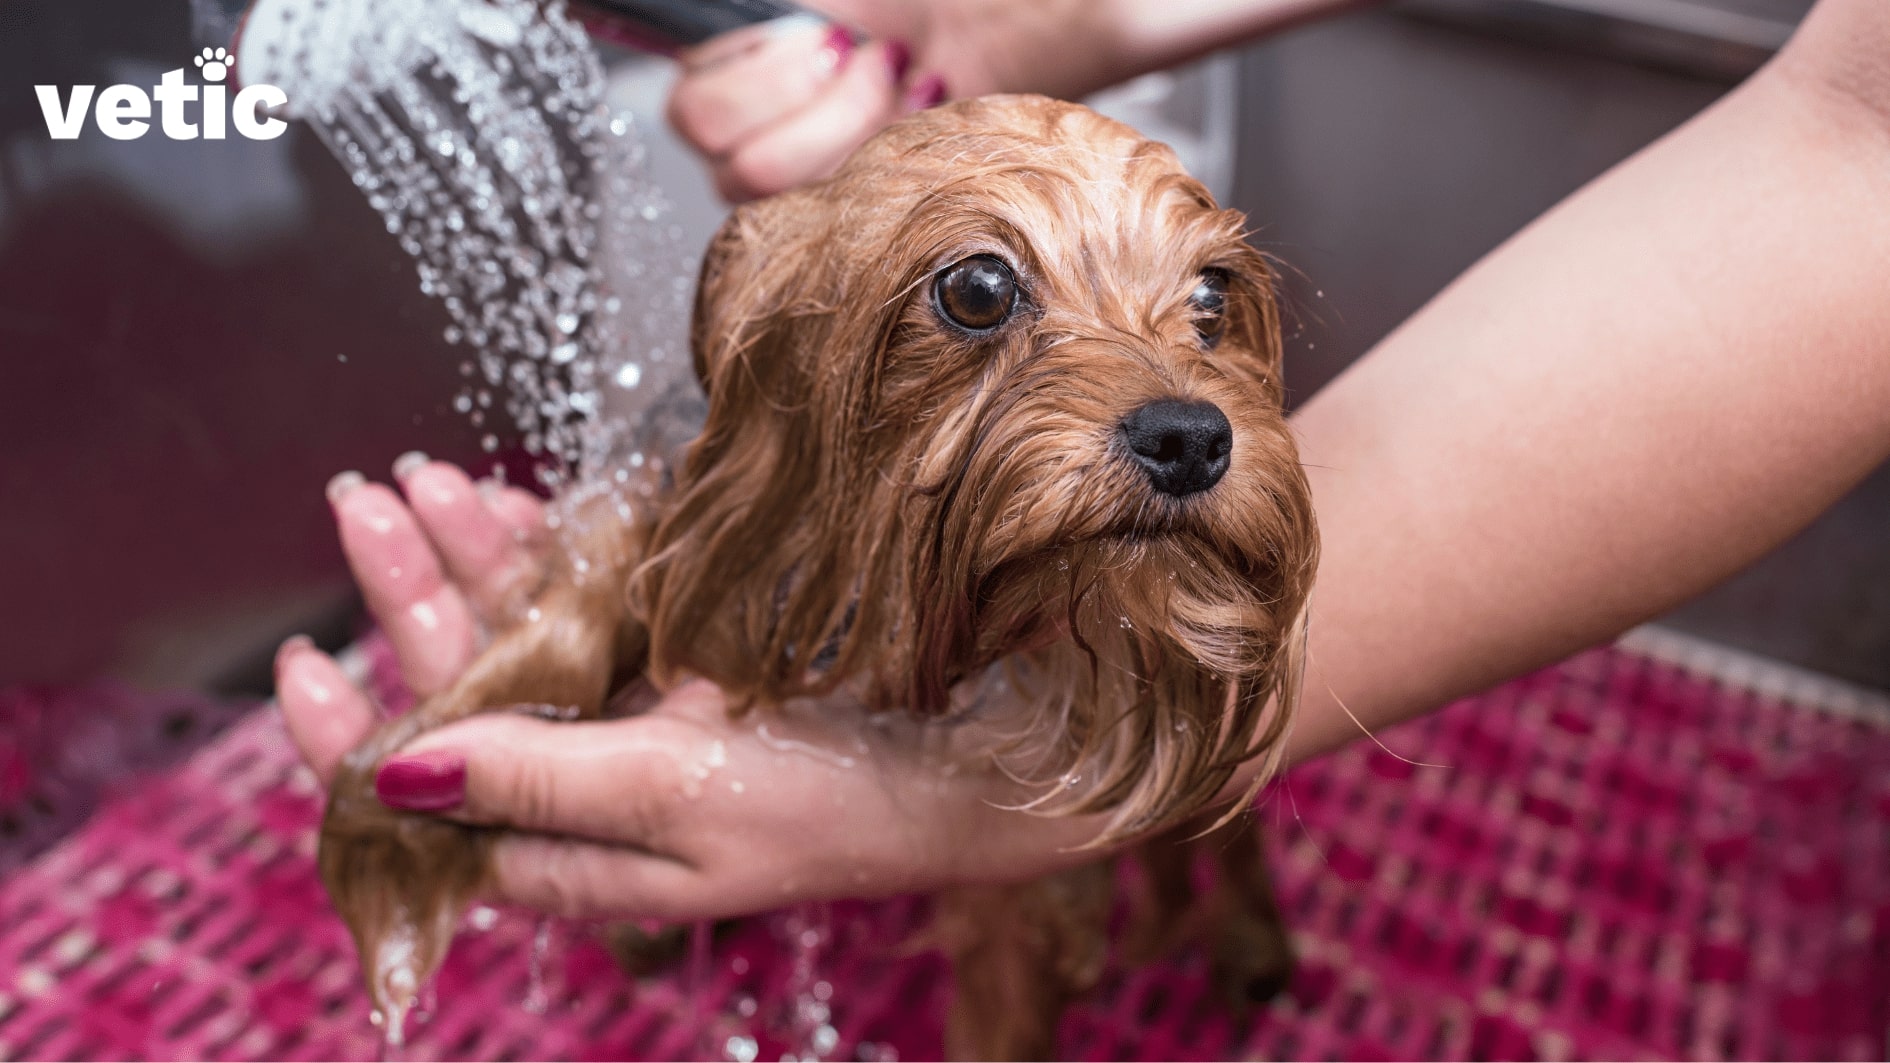 Dog being bathed with a hand shower